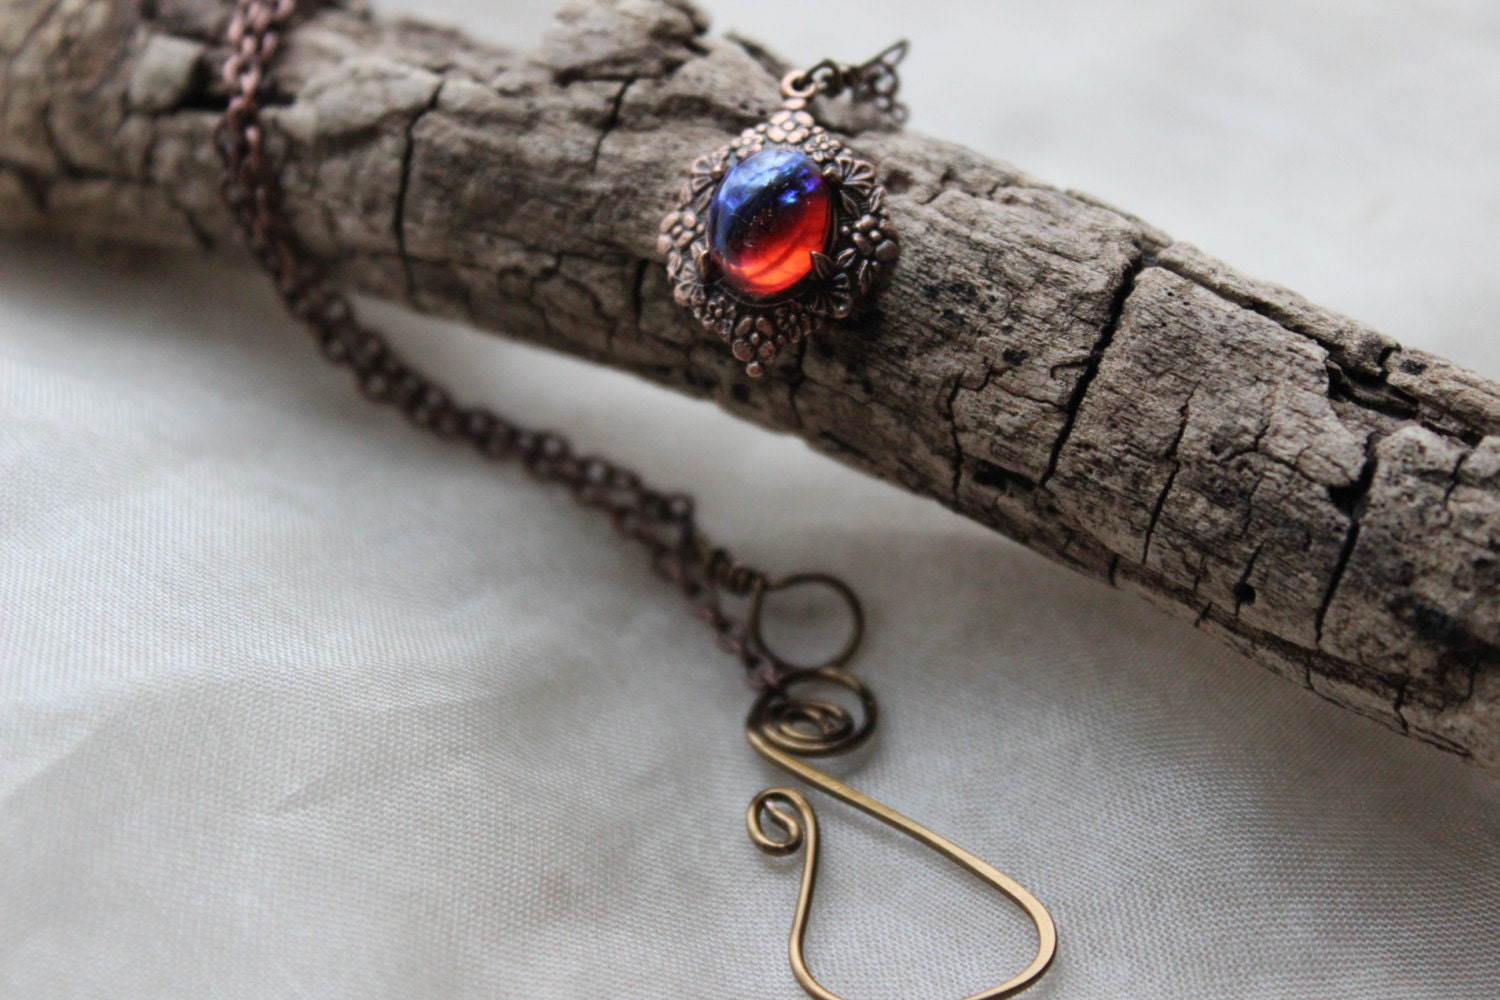 Fire Opal Necklace, Dragon Breath Necklace, Medieval Copper Necklace, Fire Opal Necklace, Opal Earrings, Free Shipping, Weddings, Christmas